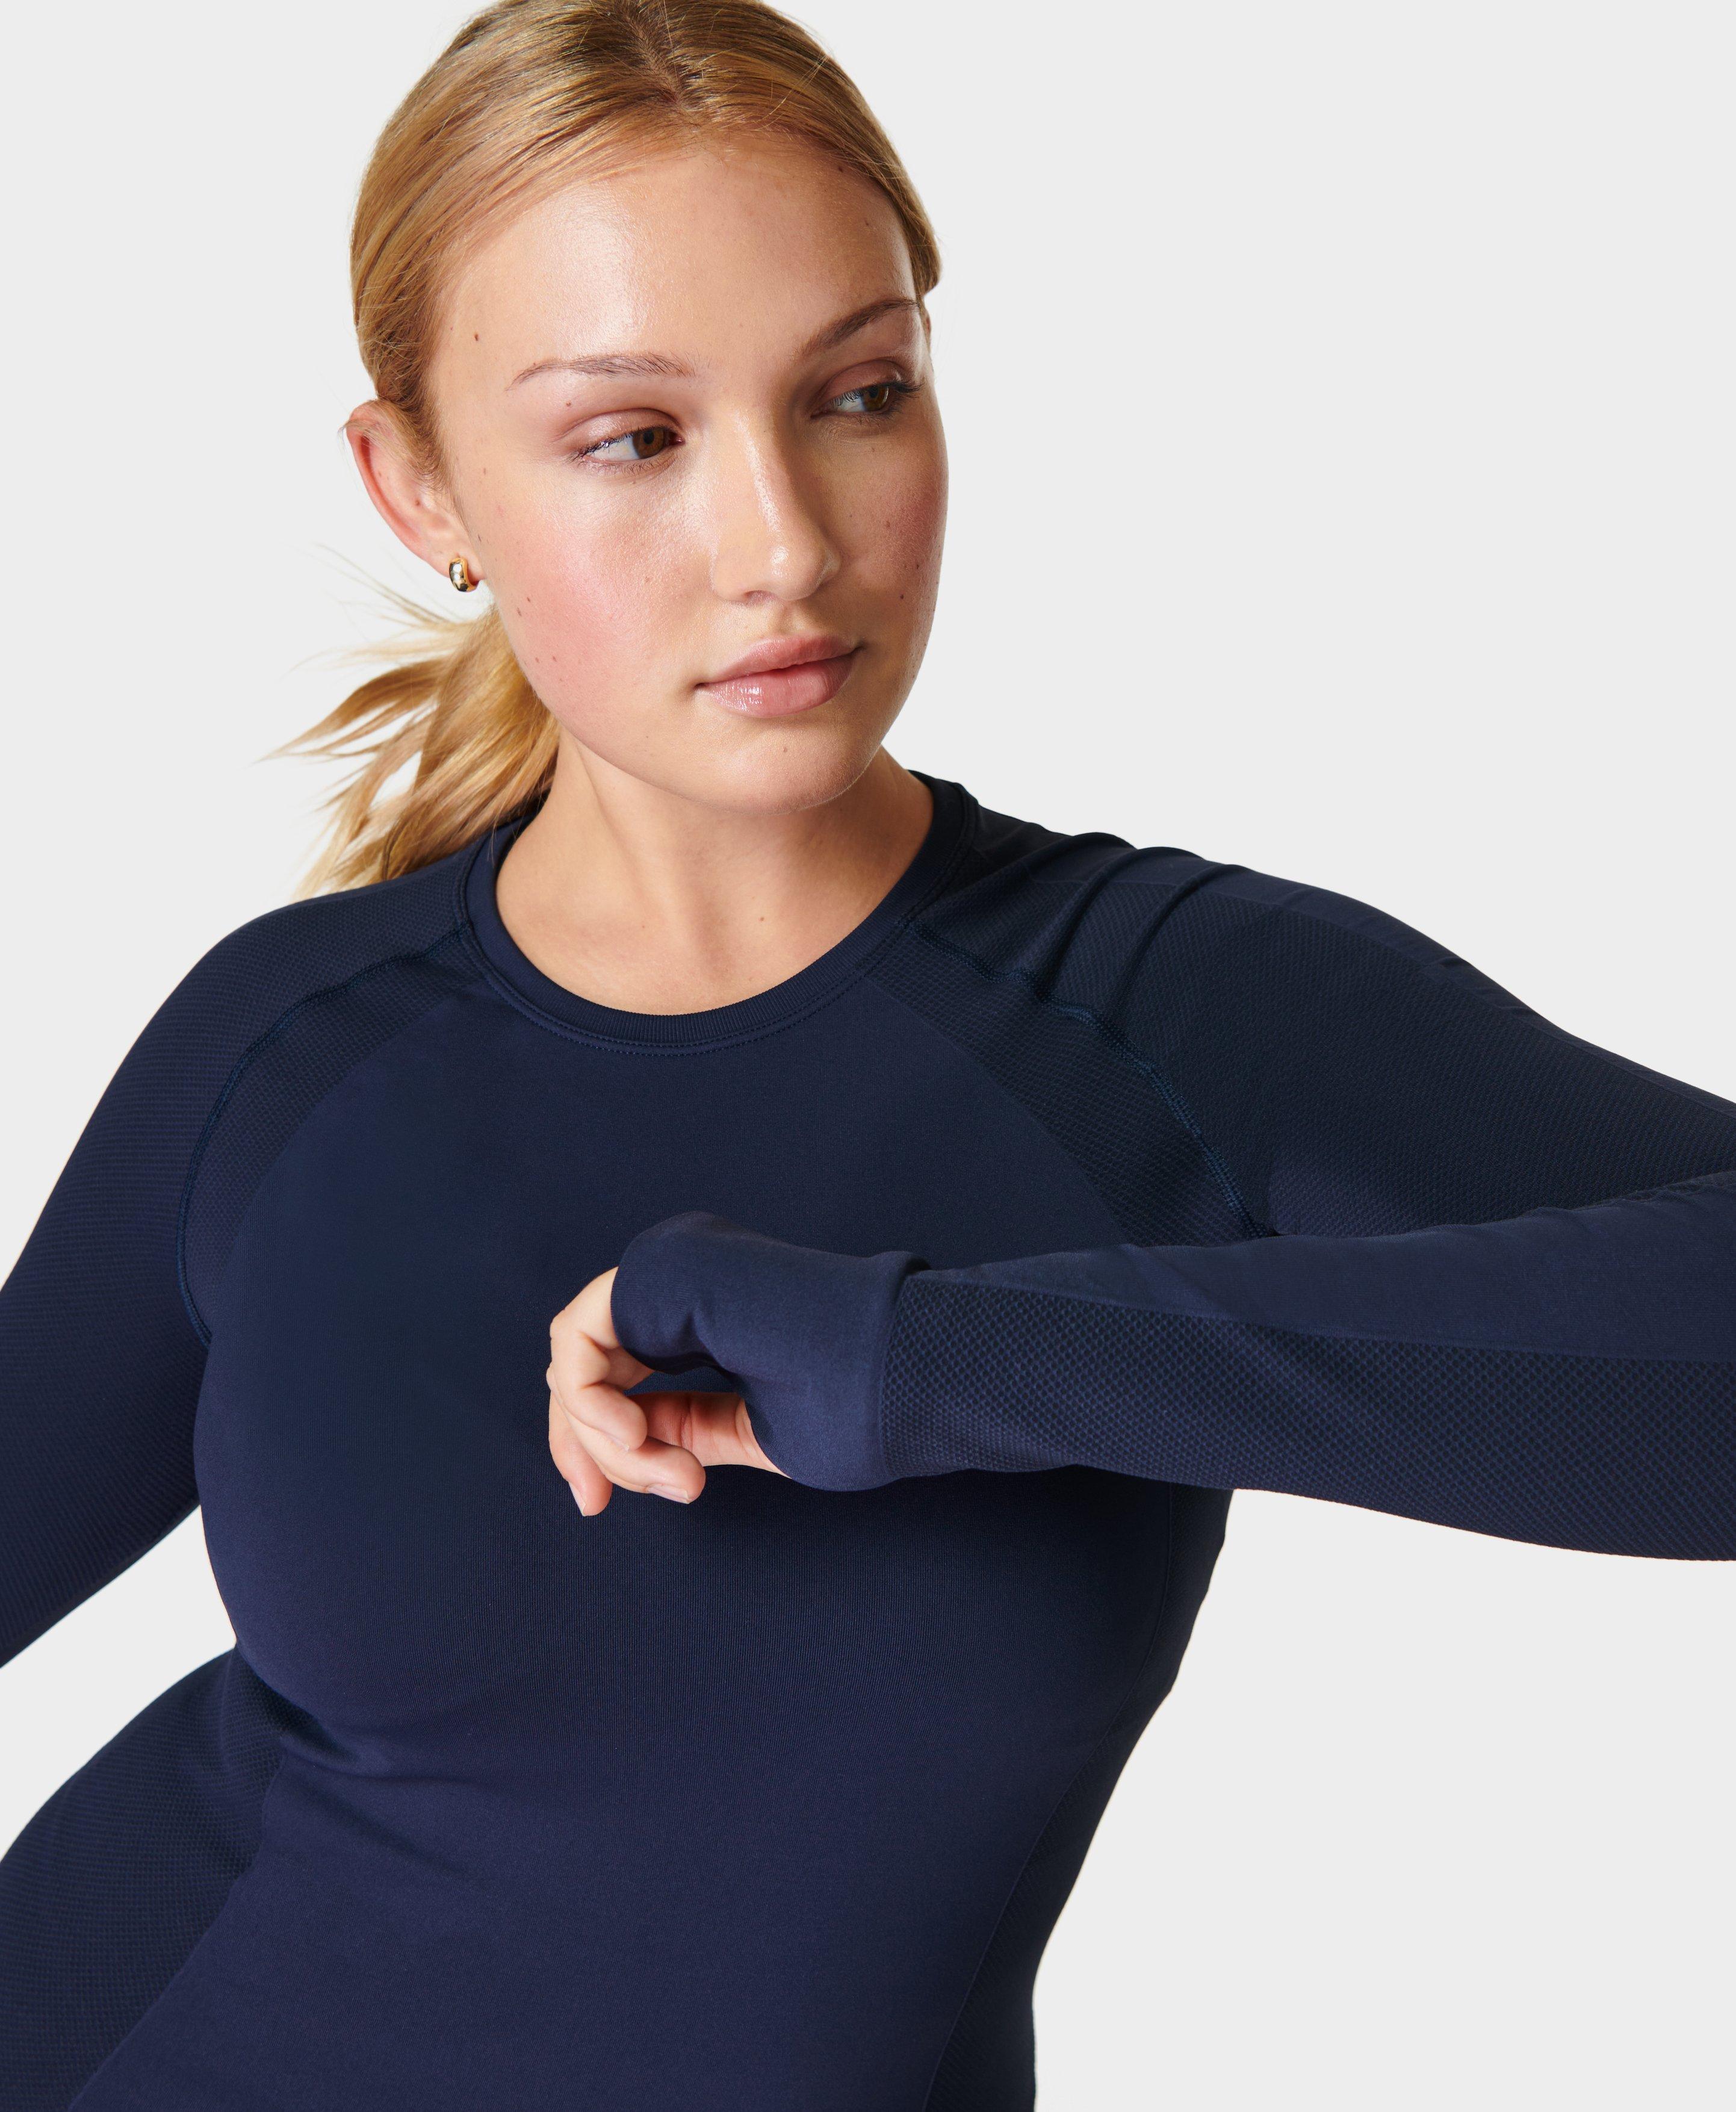 Seamless Workout Yoga Shirts for Women Activewear Dry-Fit Long Sleeve  Breathable T-Shirts Mesh Breathable Crew Neck Stretch Yoga Sport Tops  Athletic